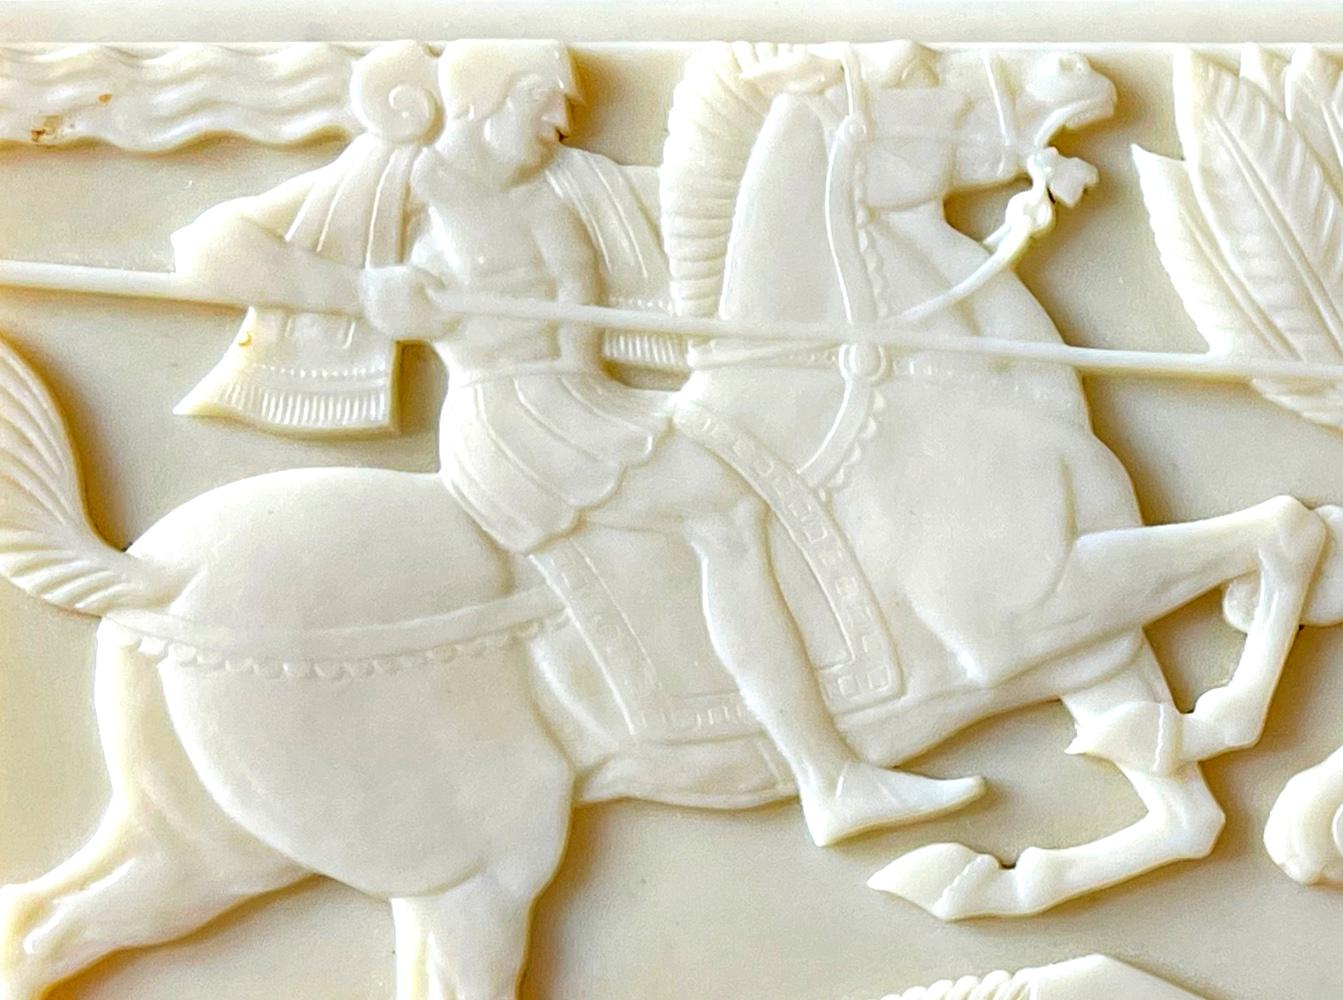 Exceedingly rare and very finely made, this Art Deco hinged box is topped with a lid in ivory-hued Bakelite that features a knight on horseback spearing a rearing lion, all in a stylized manner that draws from Medieval and Assyrian precedents. The